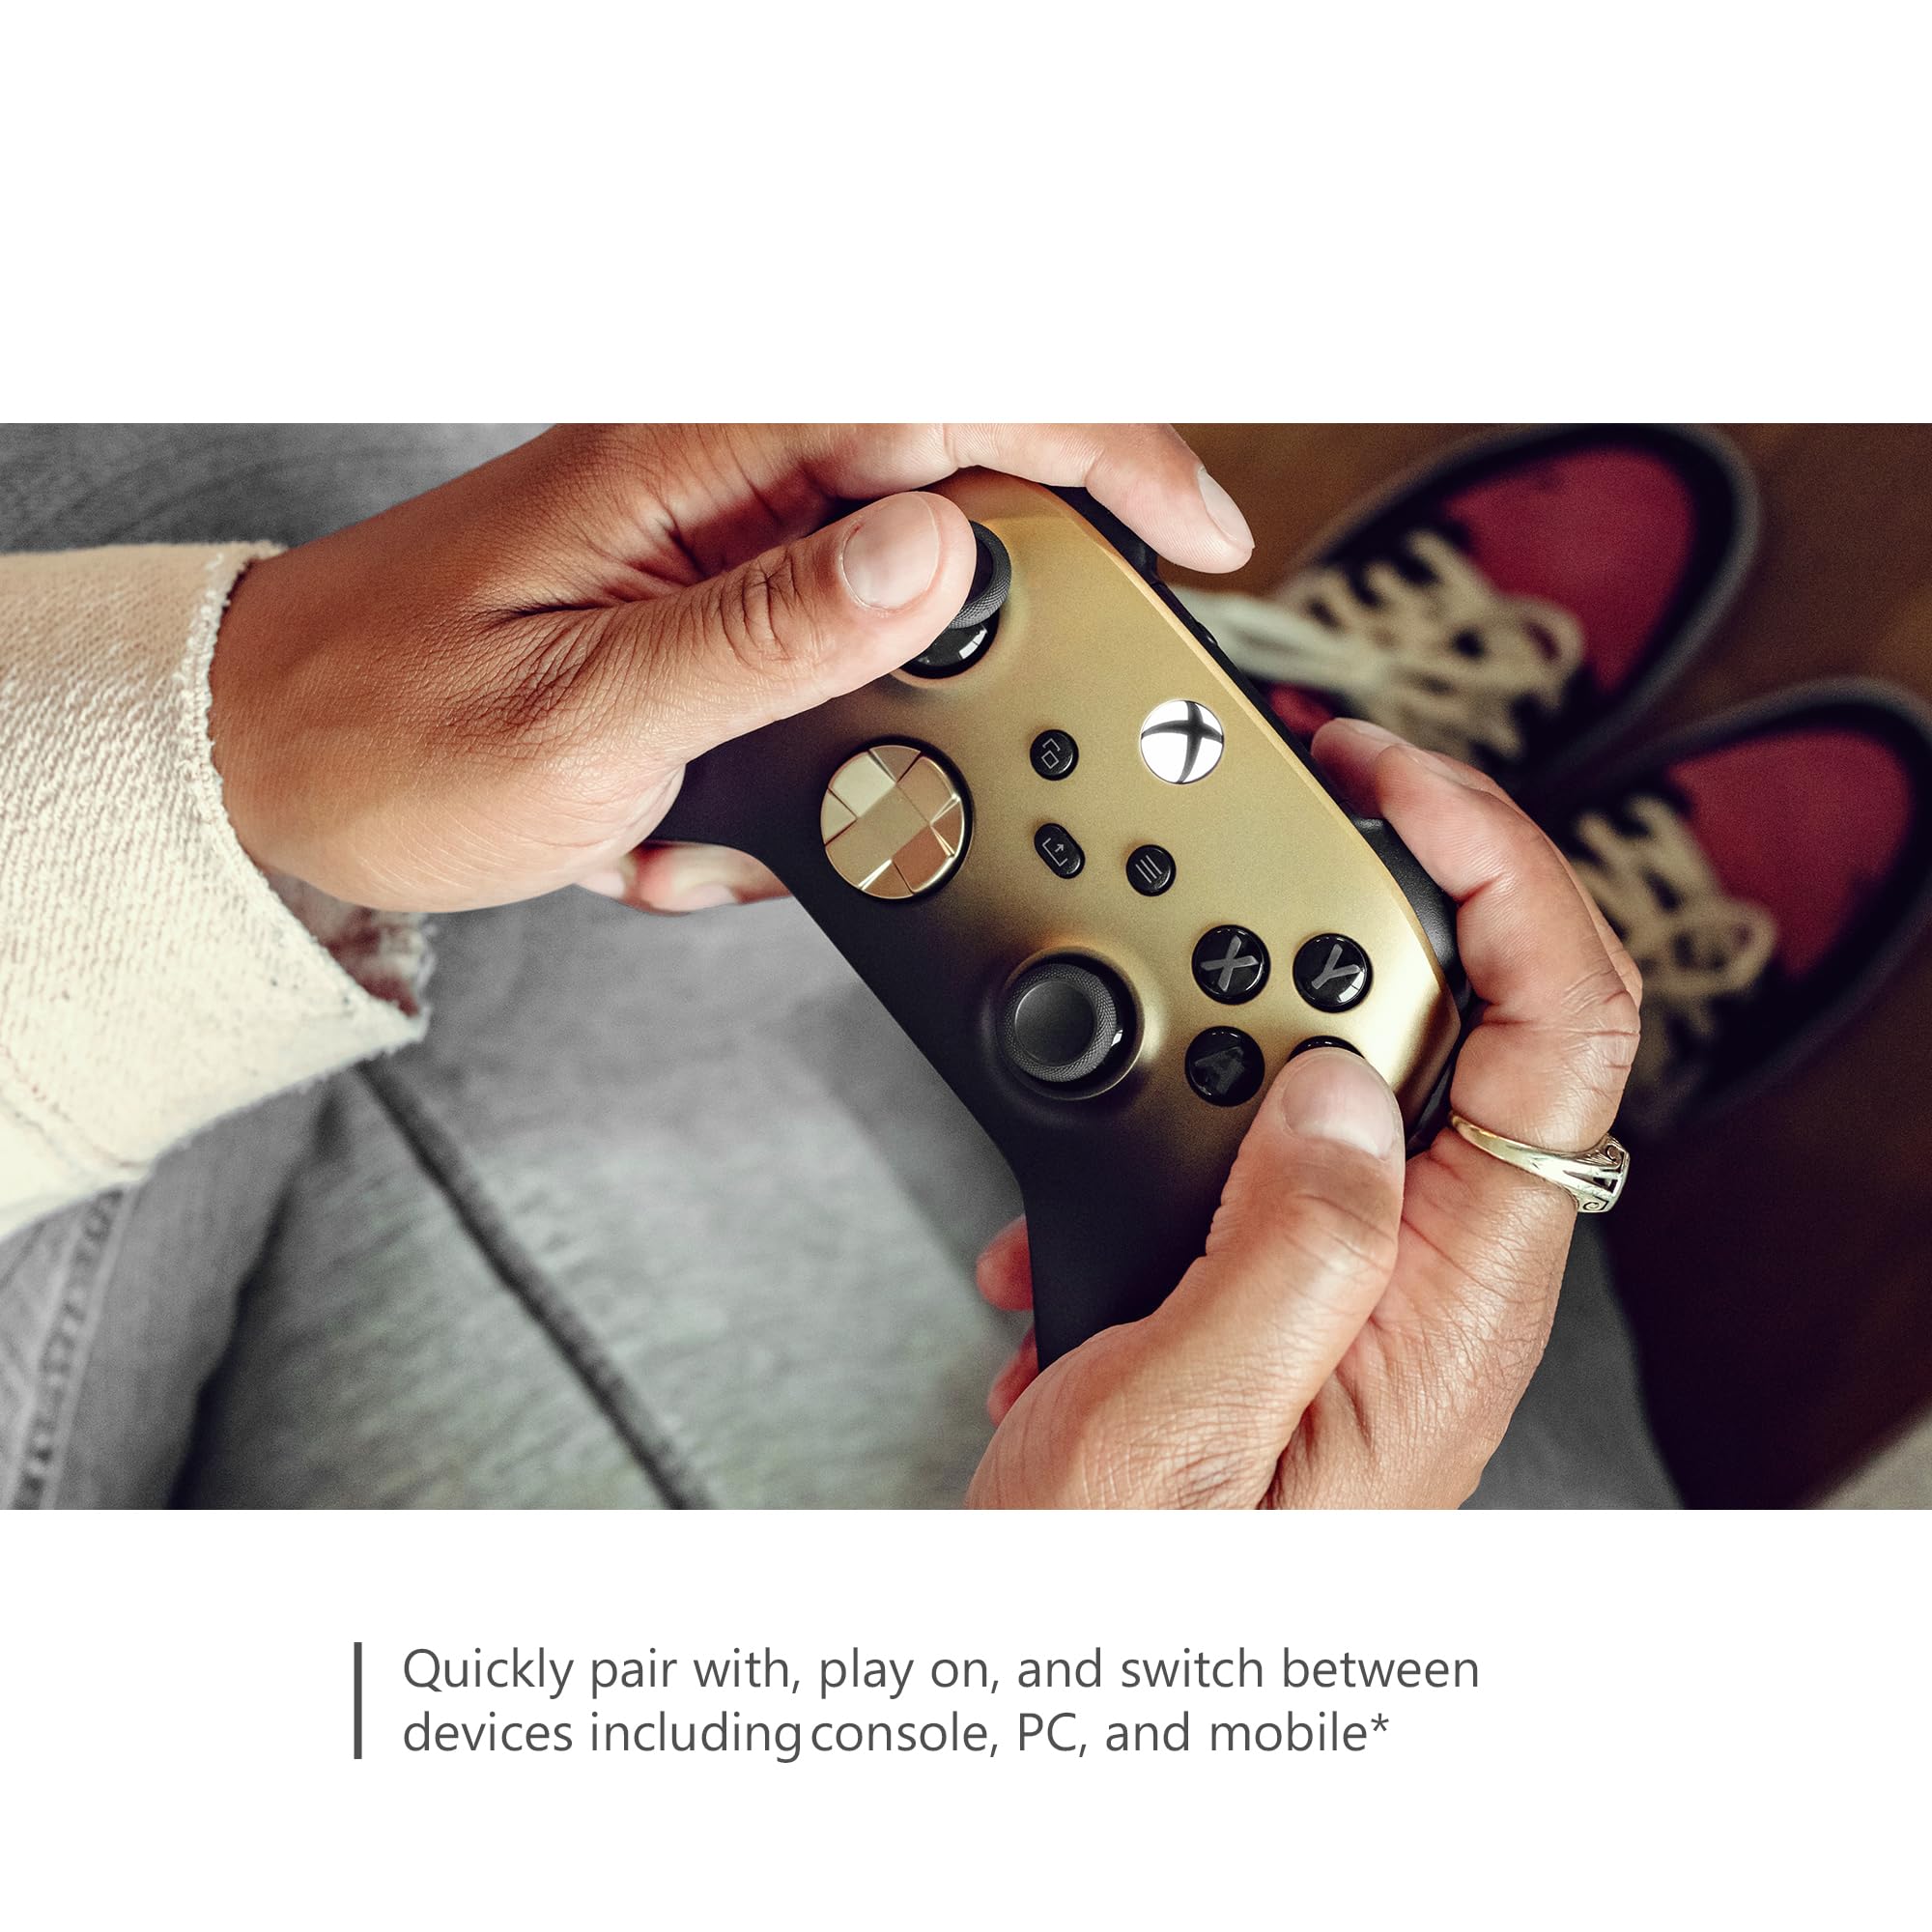 Xbox Wireless Controller – Gold Shadow Special Edition for Xbox Series X|S, Xbox One, and Windows Devices